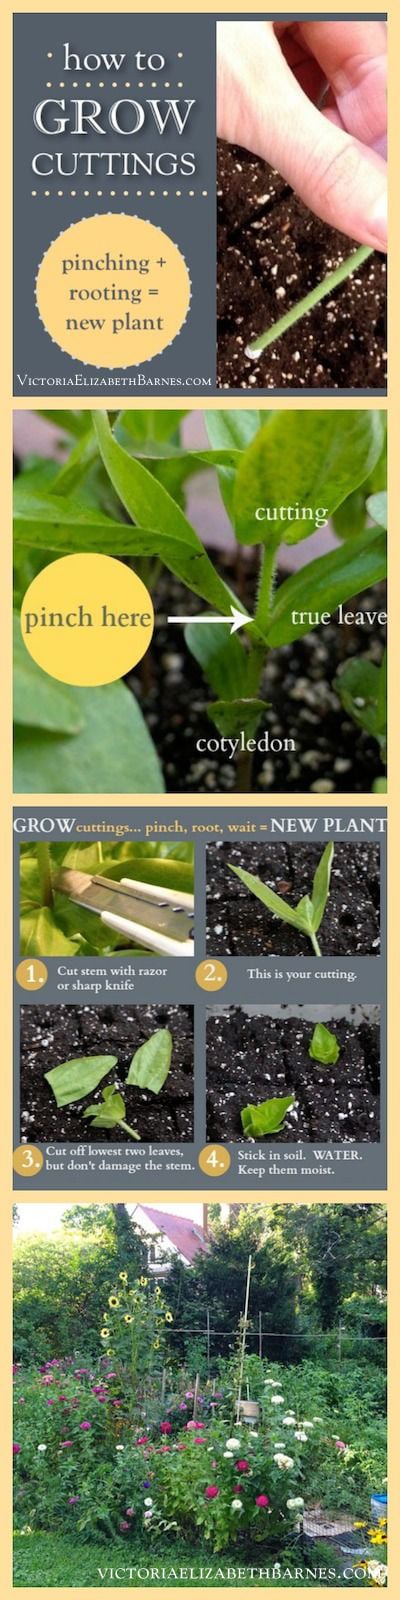 How to grow plant cuttings. Step-by-step instructions for pinching plants and rooting the cuttings... You'll have fuller plants and more flowers.